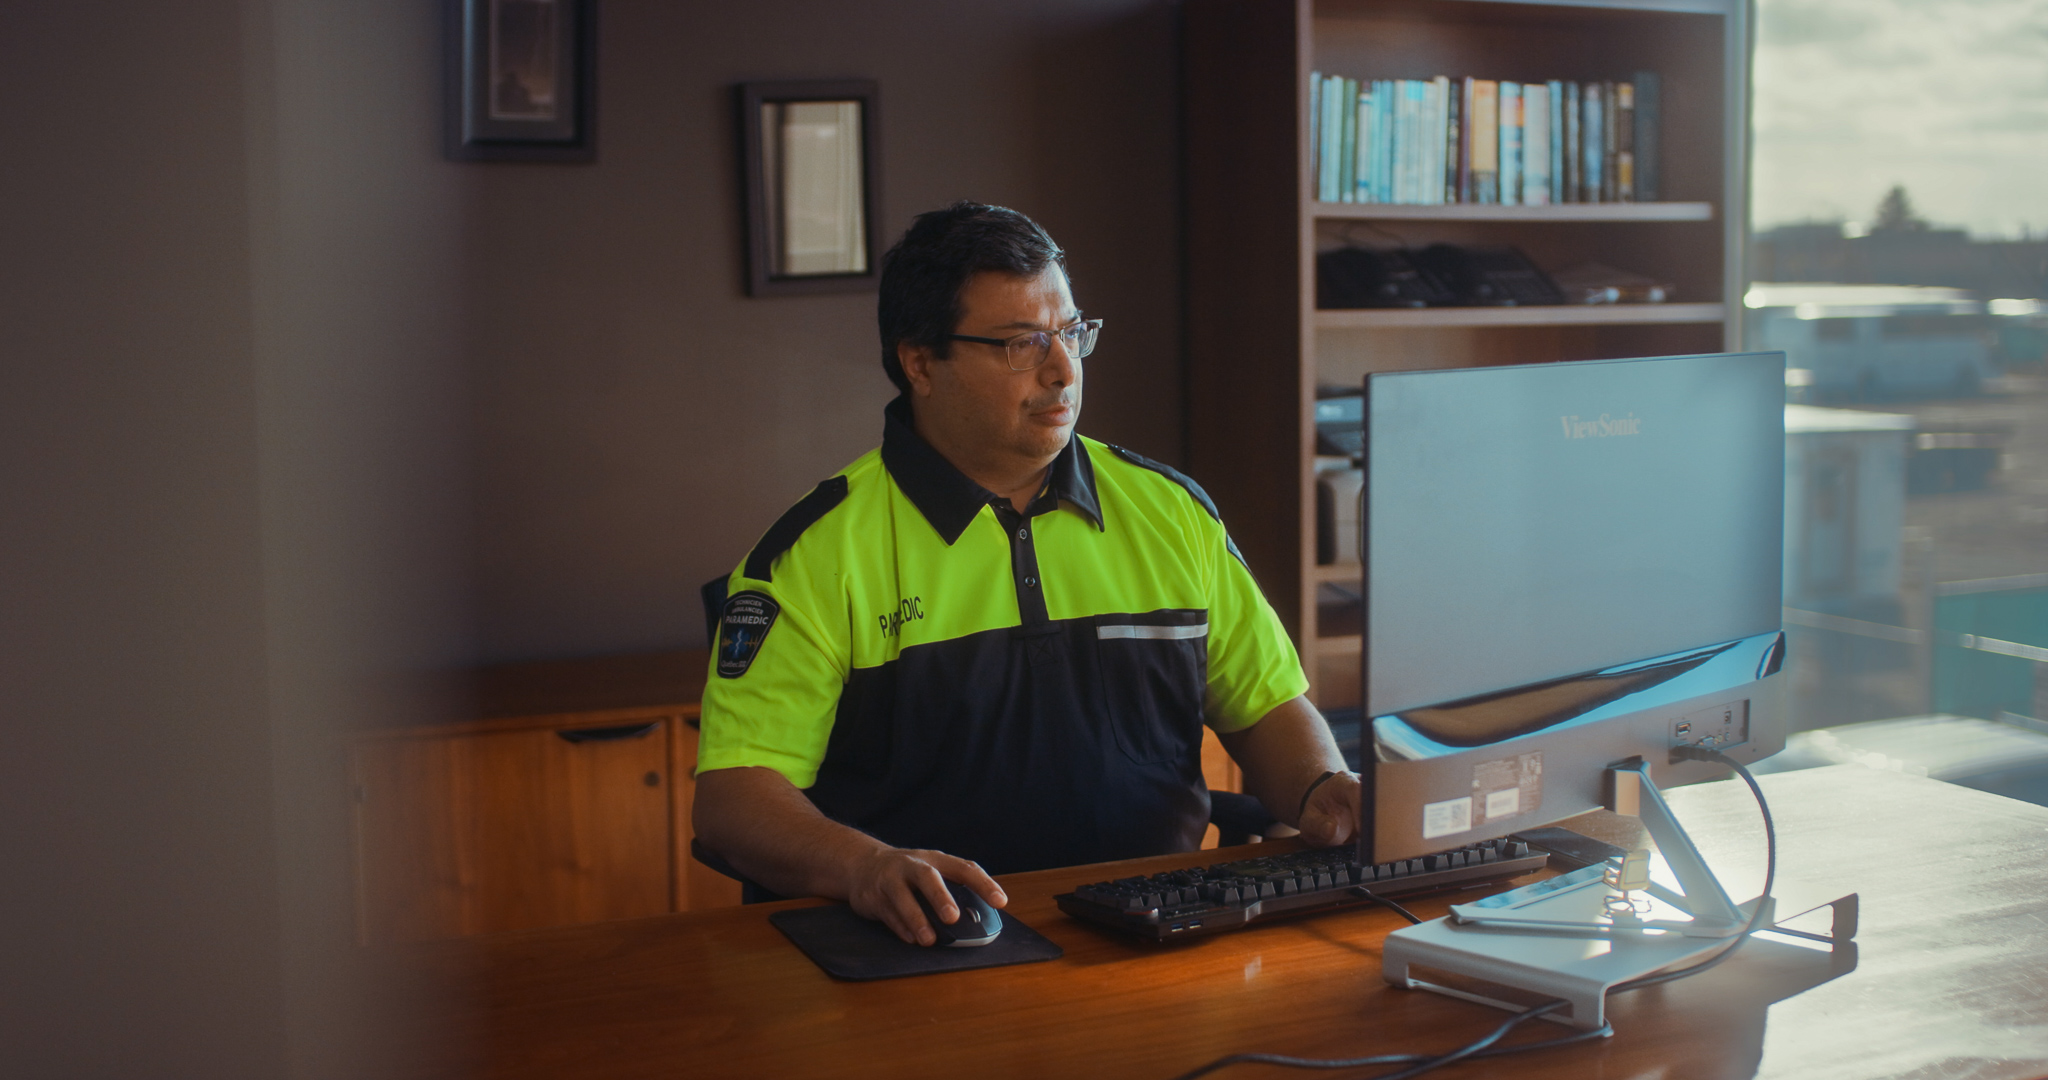 Deputy Chief of Paramedic Services sits at his desk looking at the computer screen